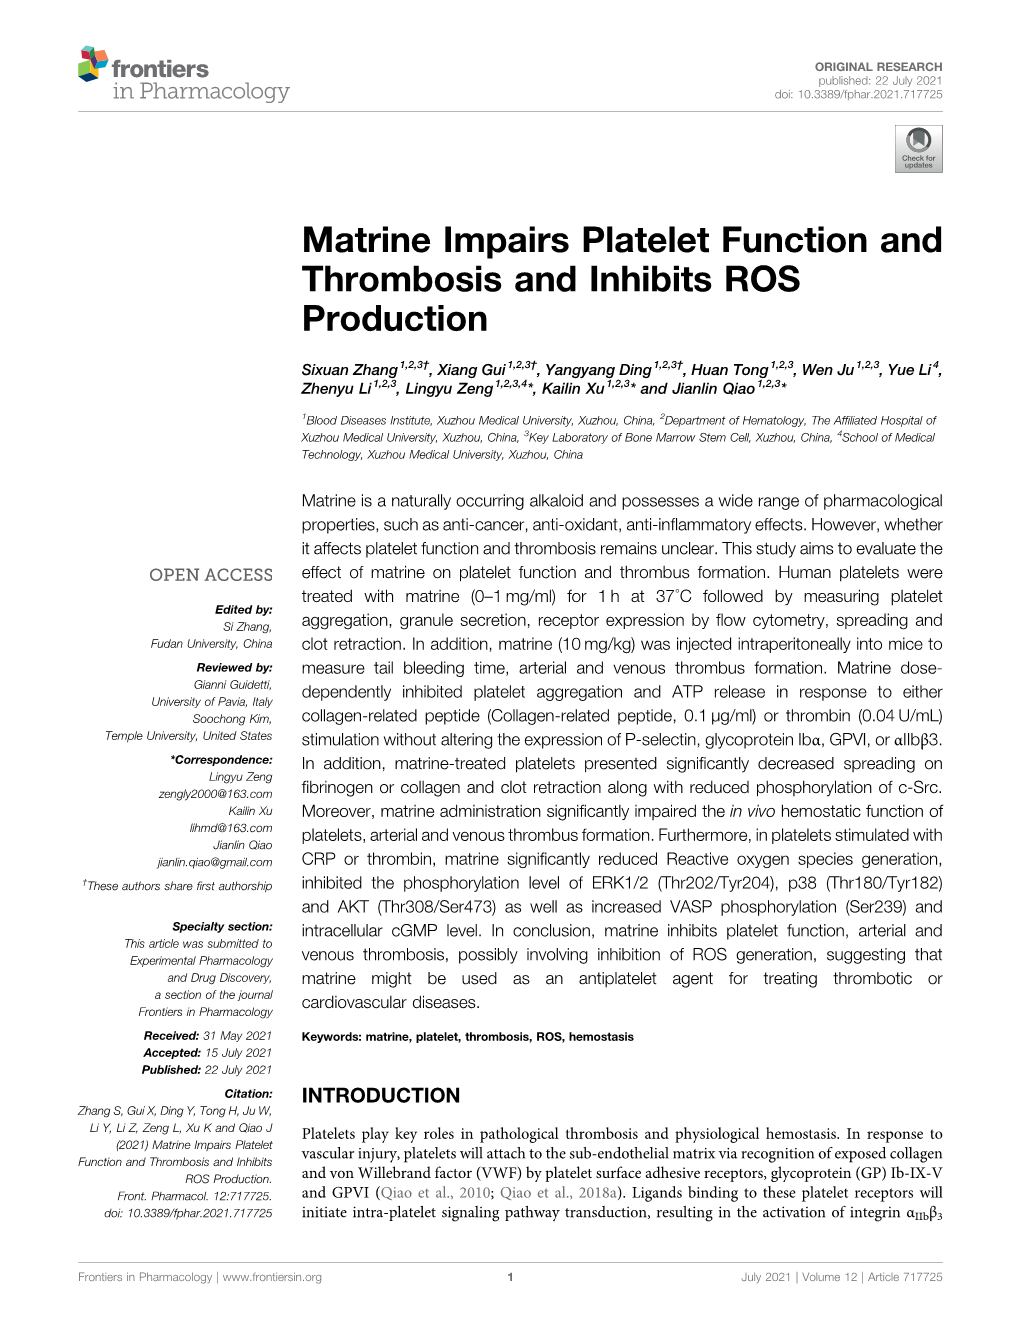 Matrine Impairs Platelet Function and Thrombosis and Inhibits ROS Production